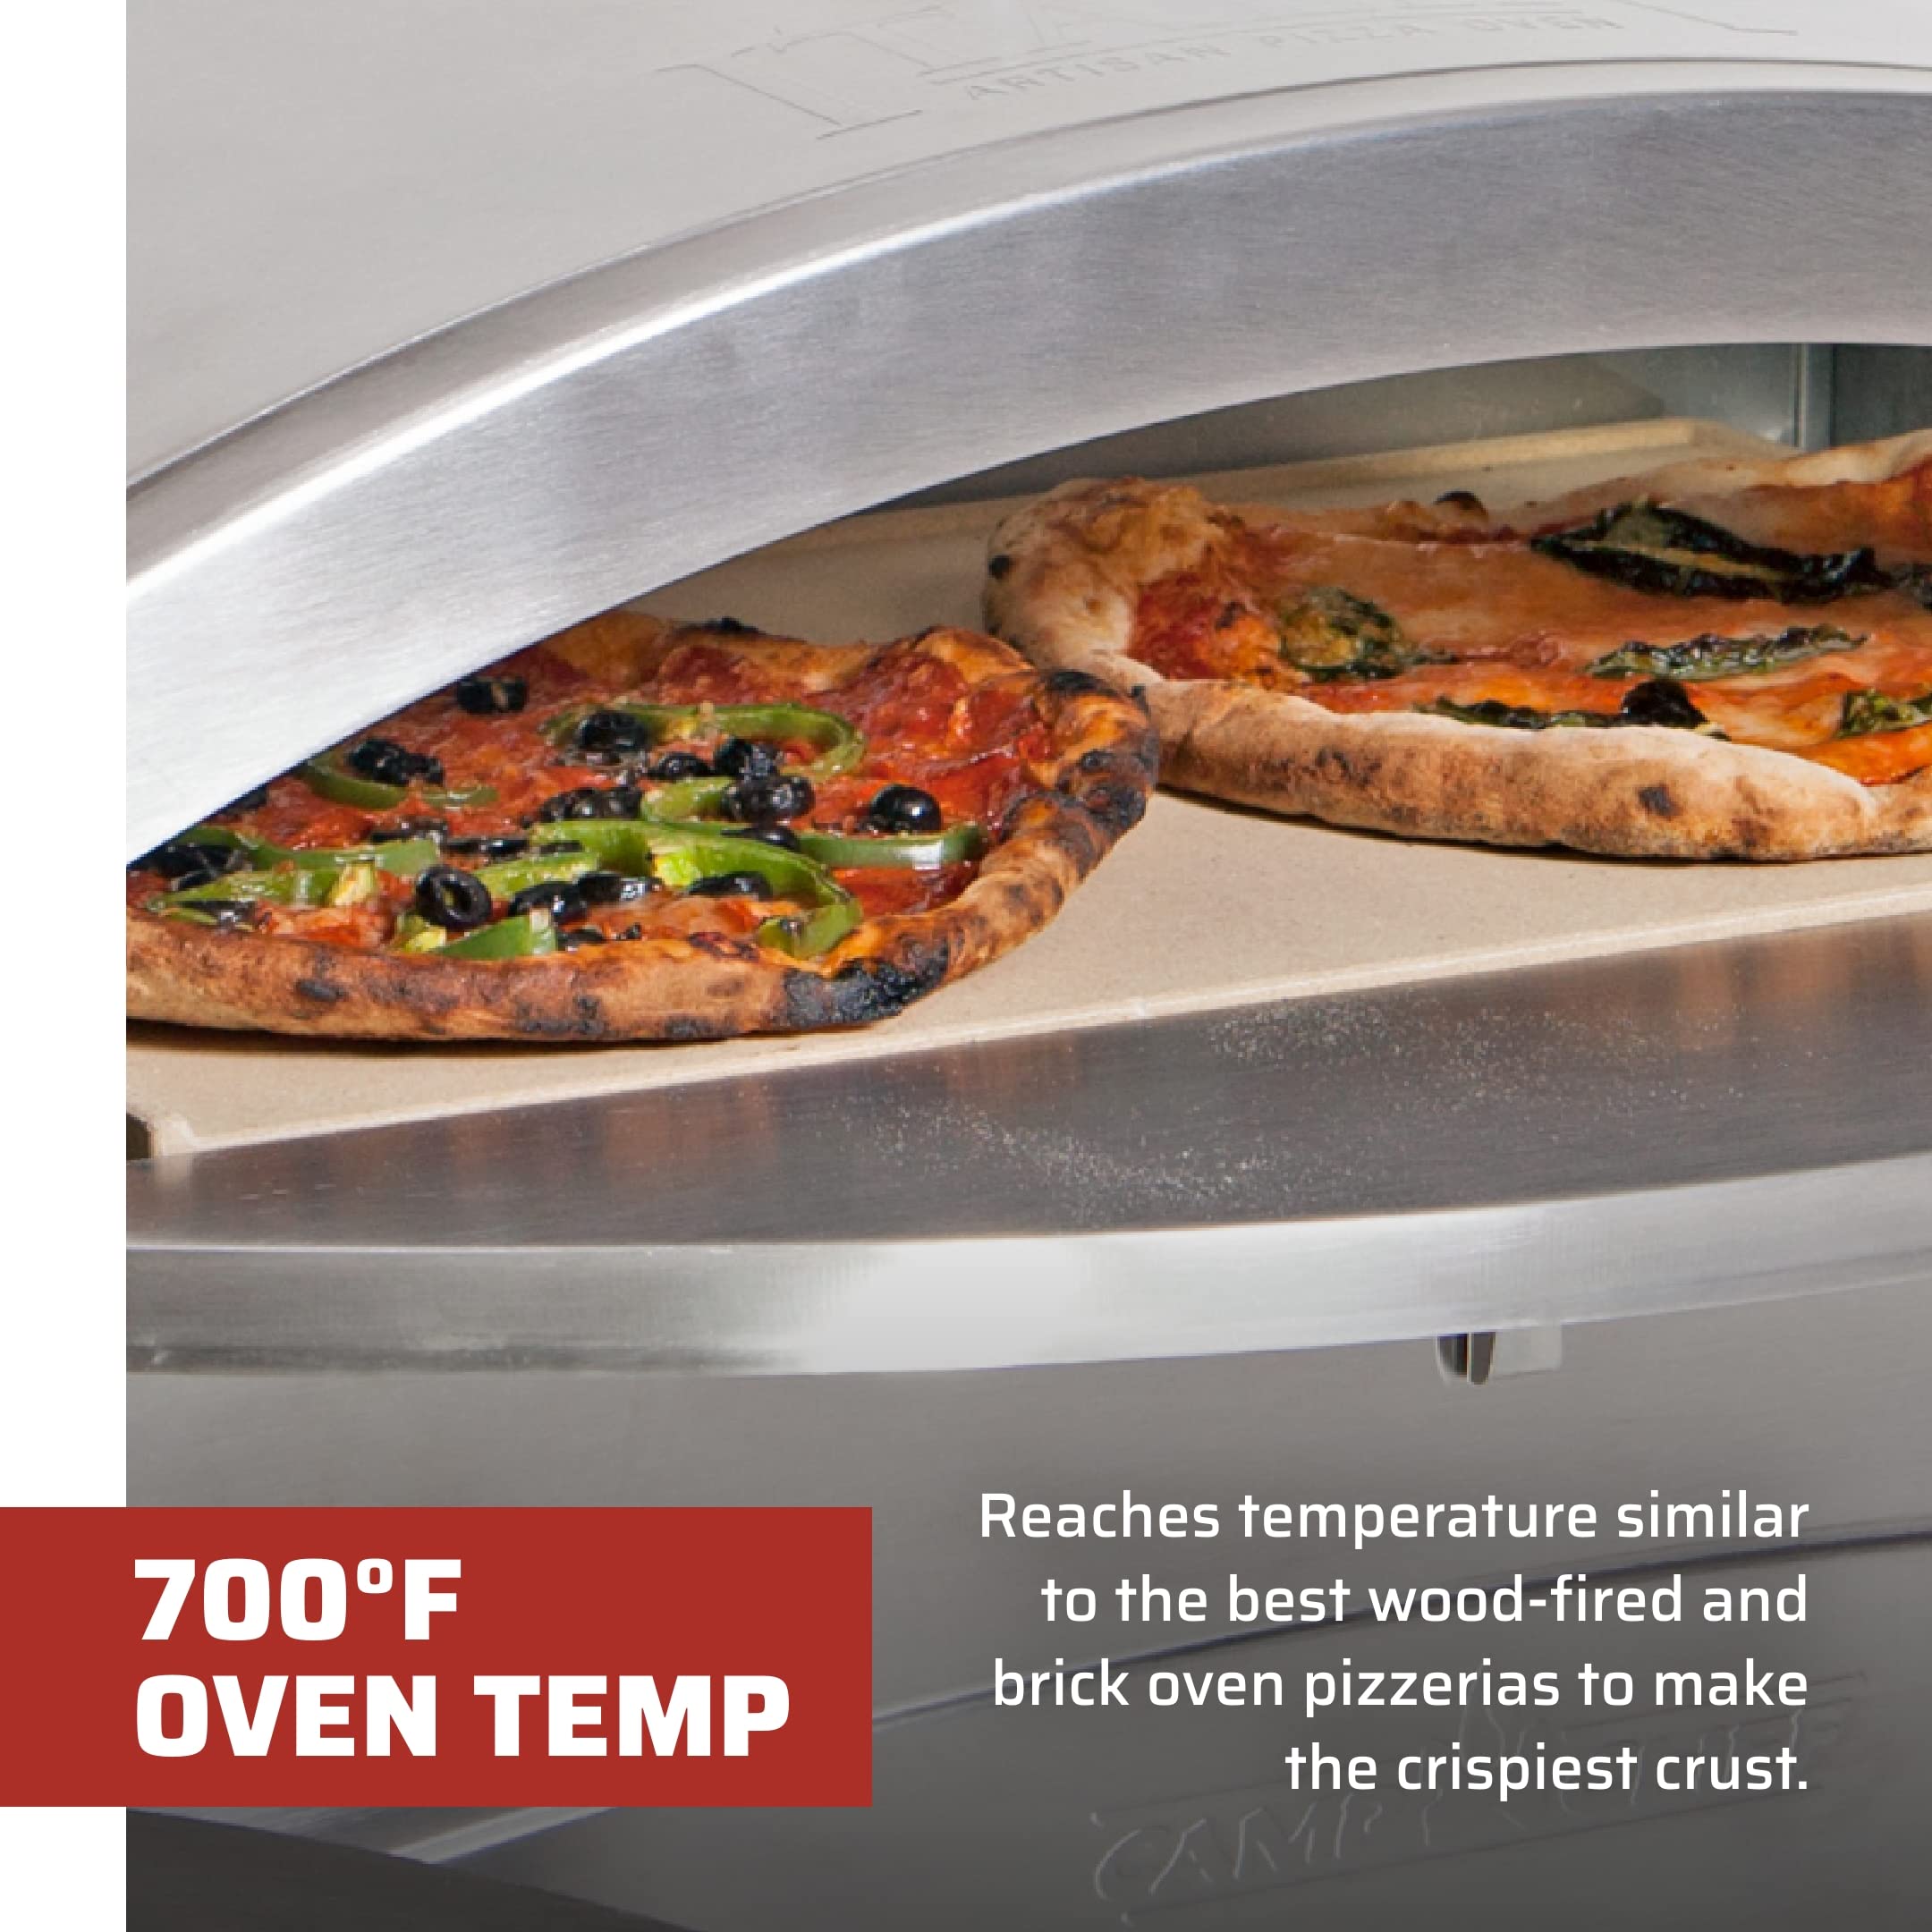 Camp Chef Italia Artisan Pizza Oven, Stainless Steel, 15 in. x 26 in. x 16